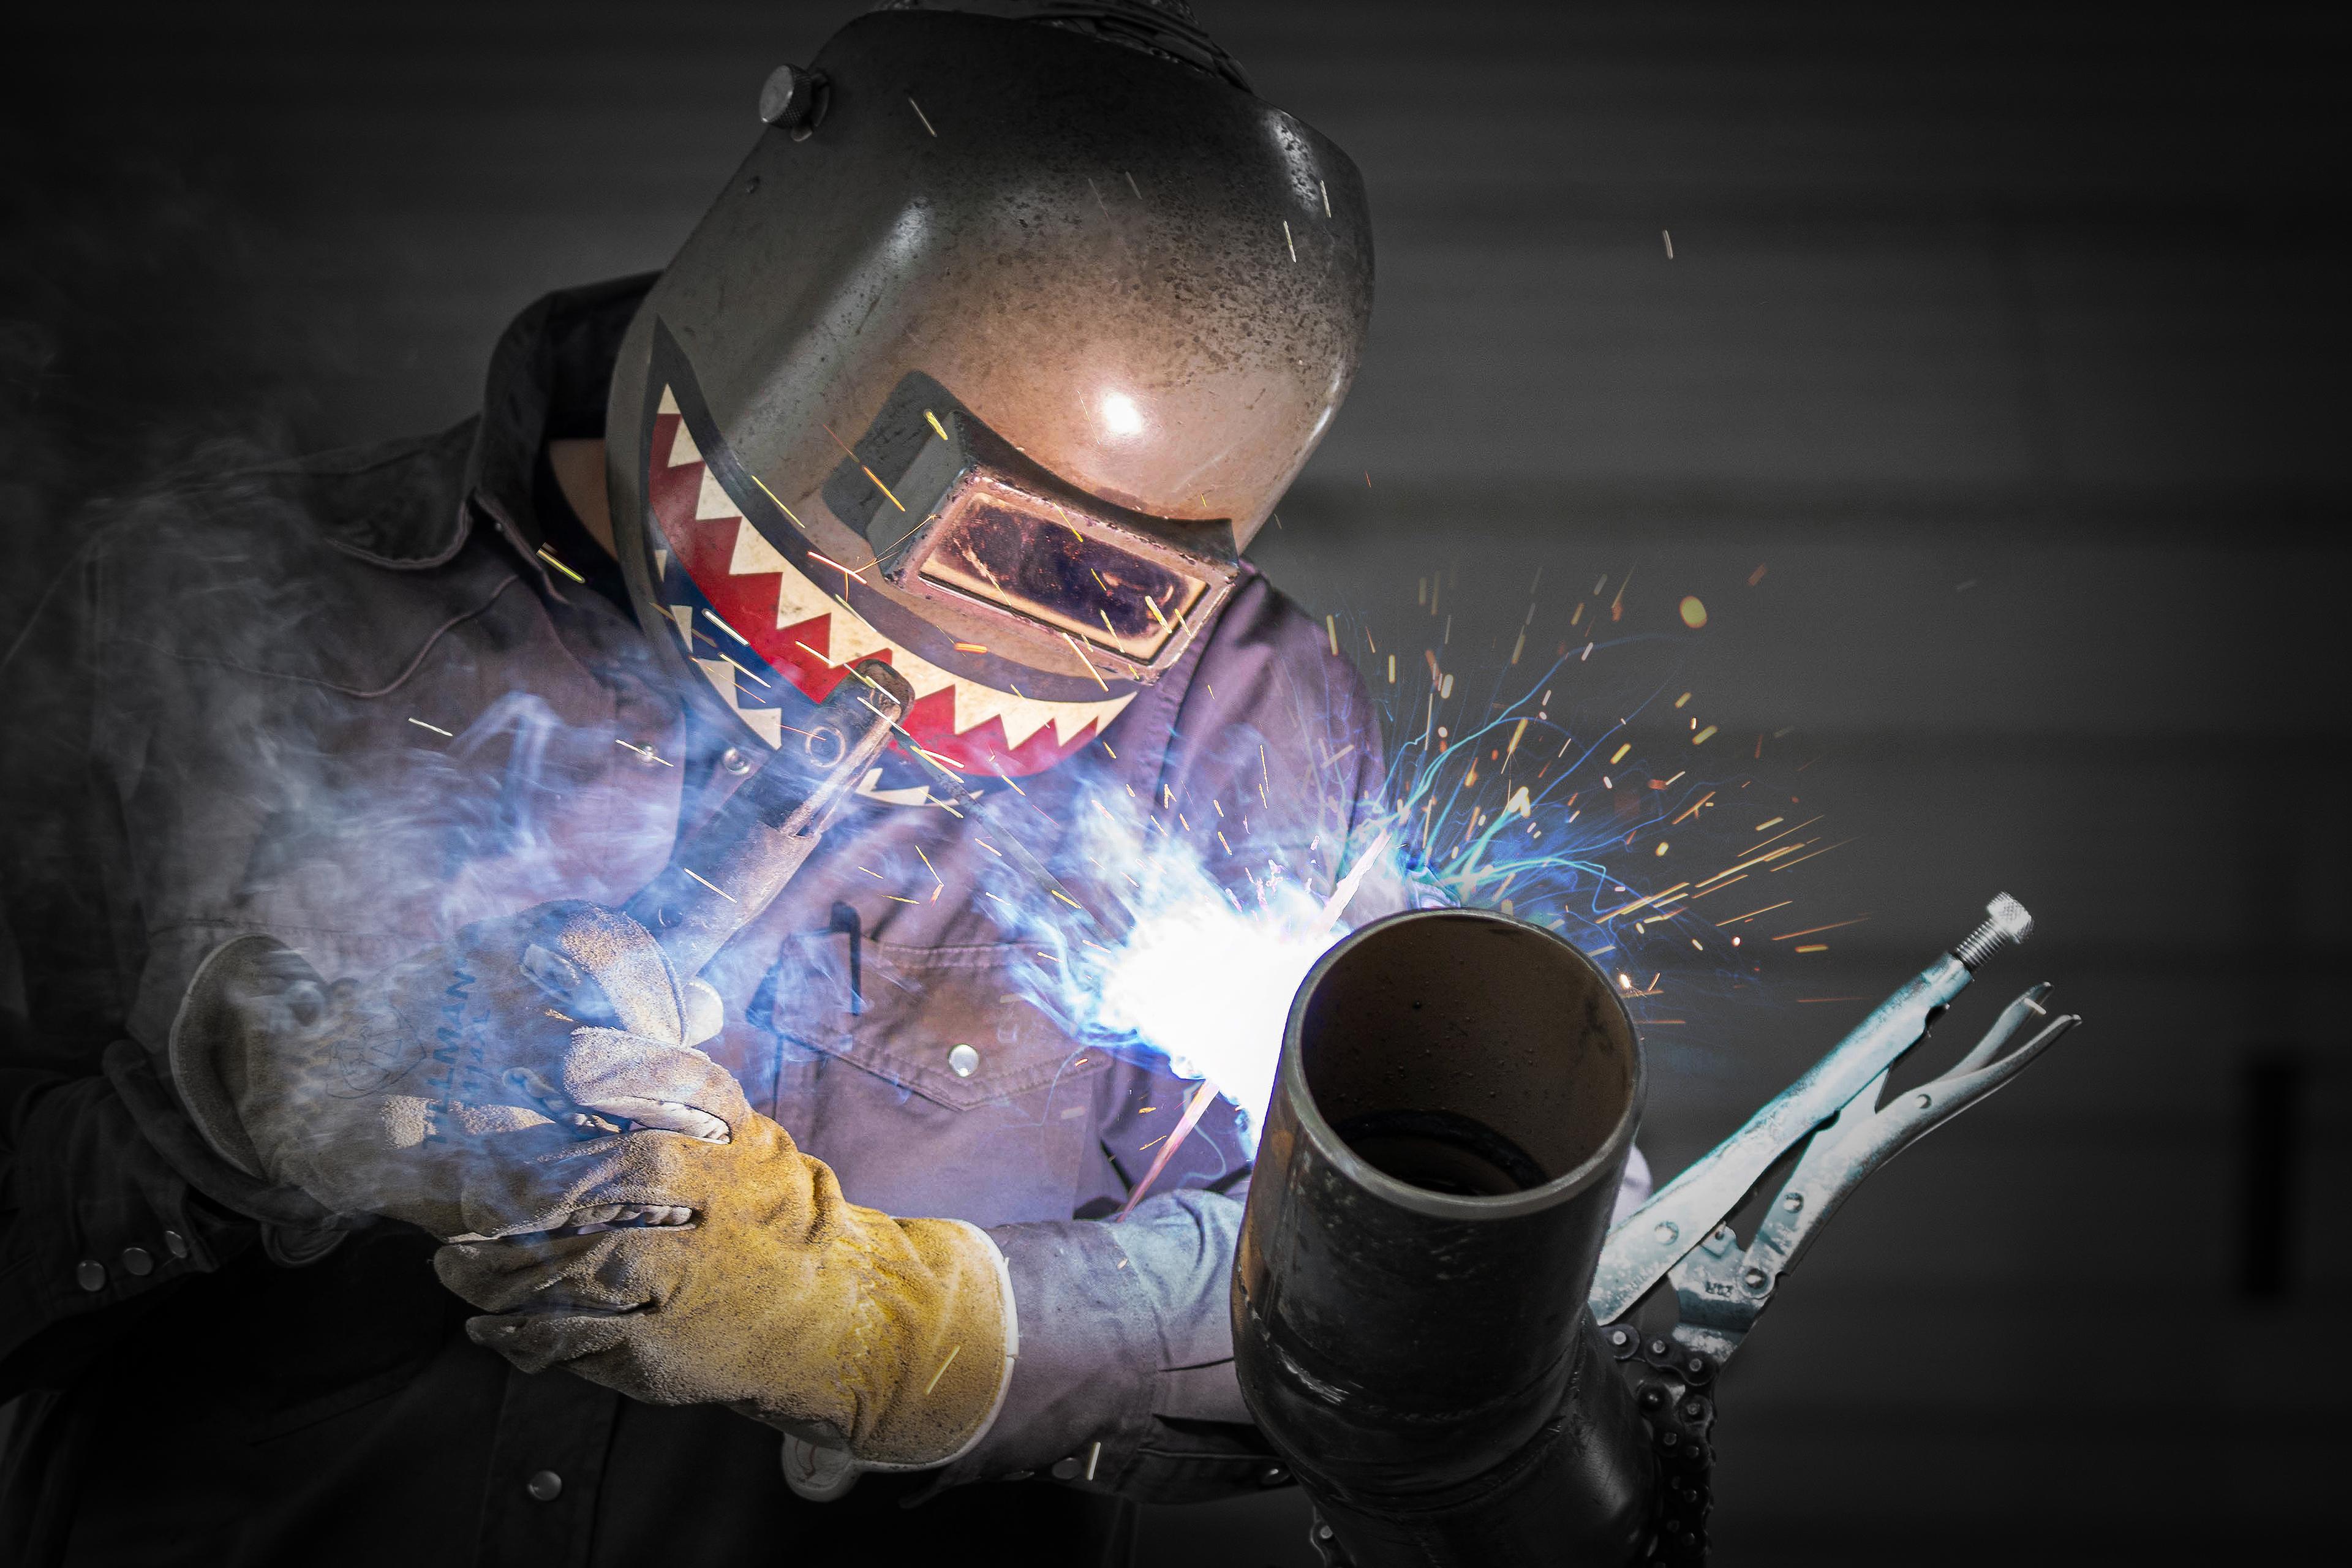 a construction worker welding while wearing a welding helmet that has a shark painted on it